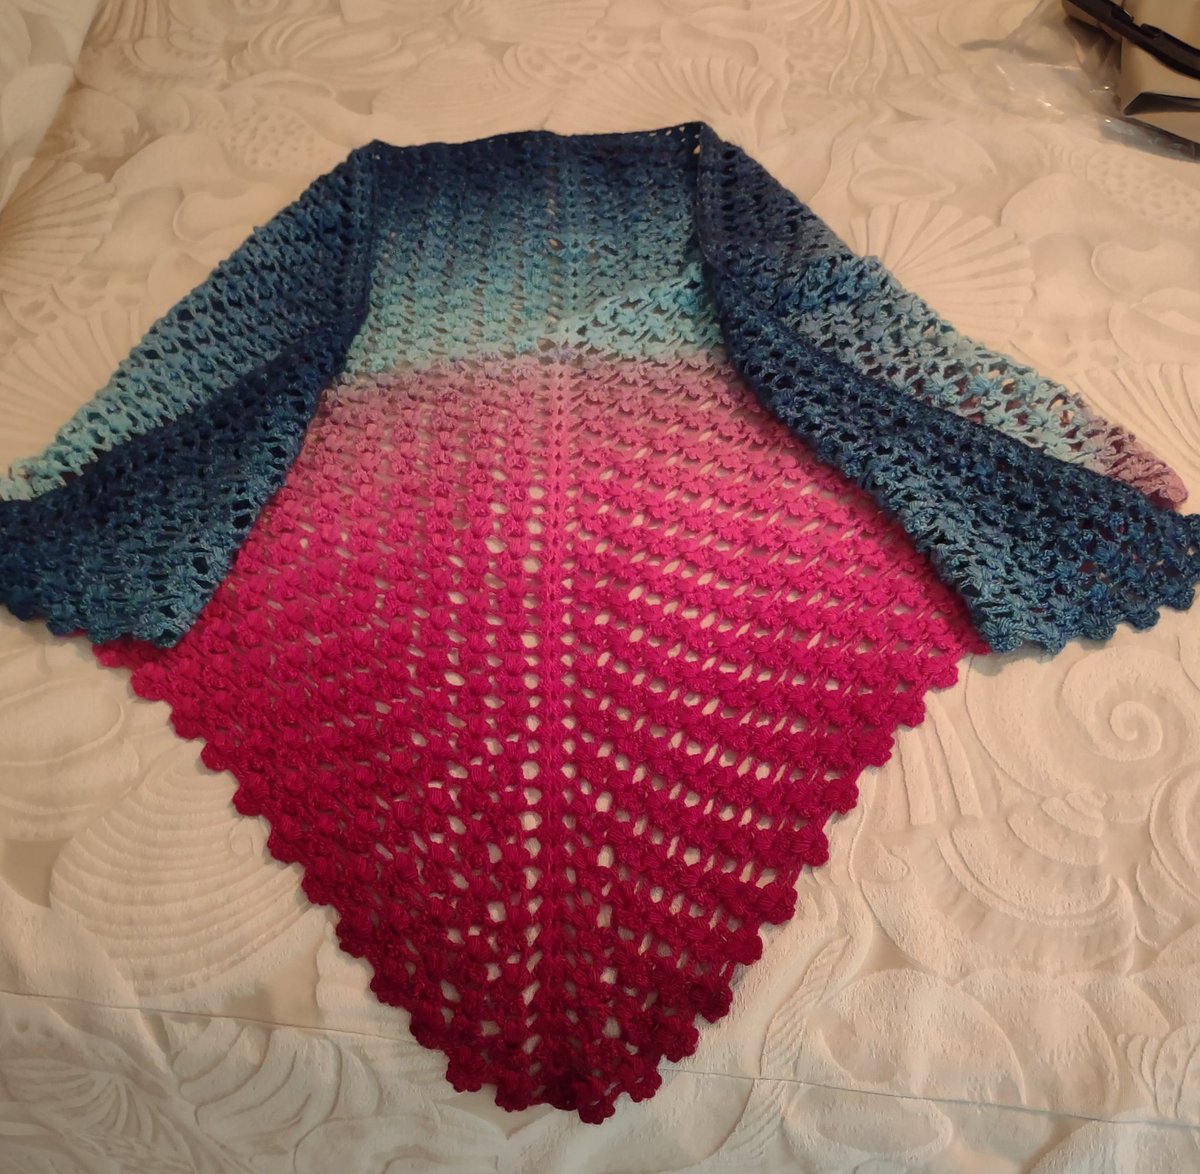 Mail haul!! My new shawl from #RepublicofYarnia !  Thanks @ISASaxonists I love it!